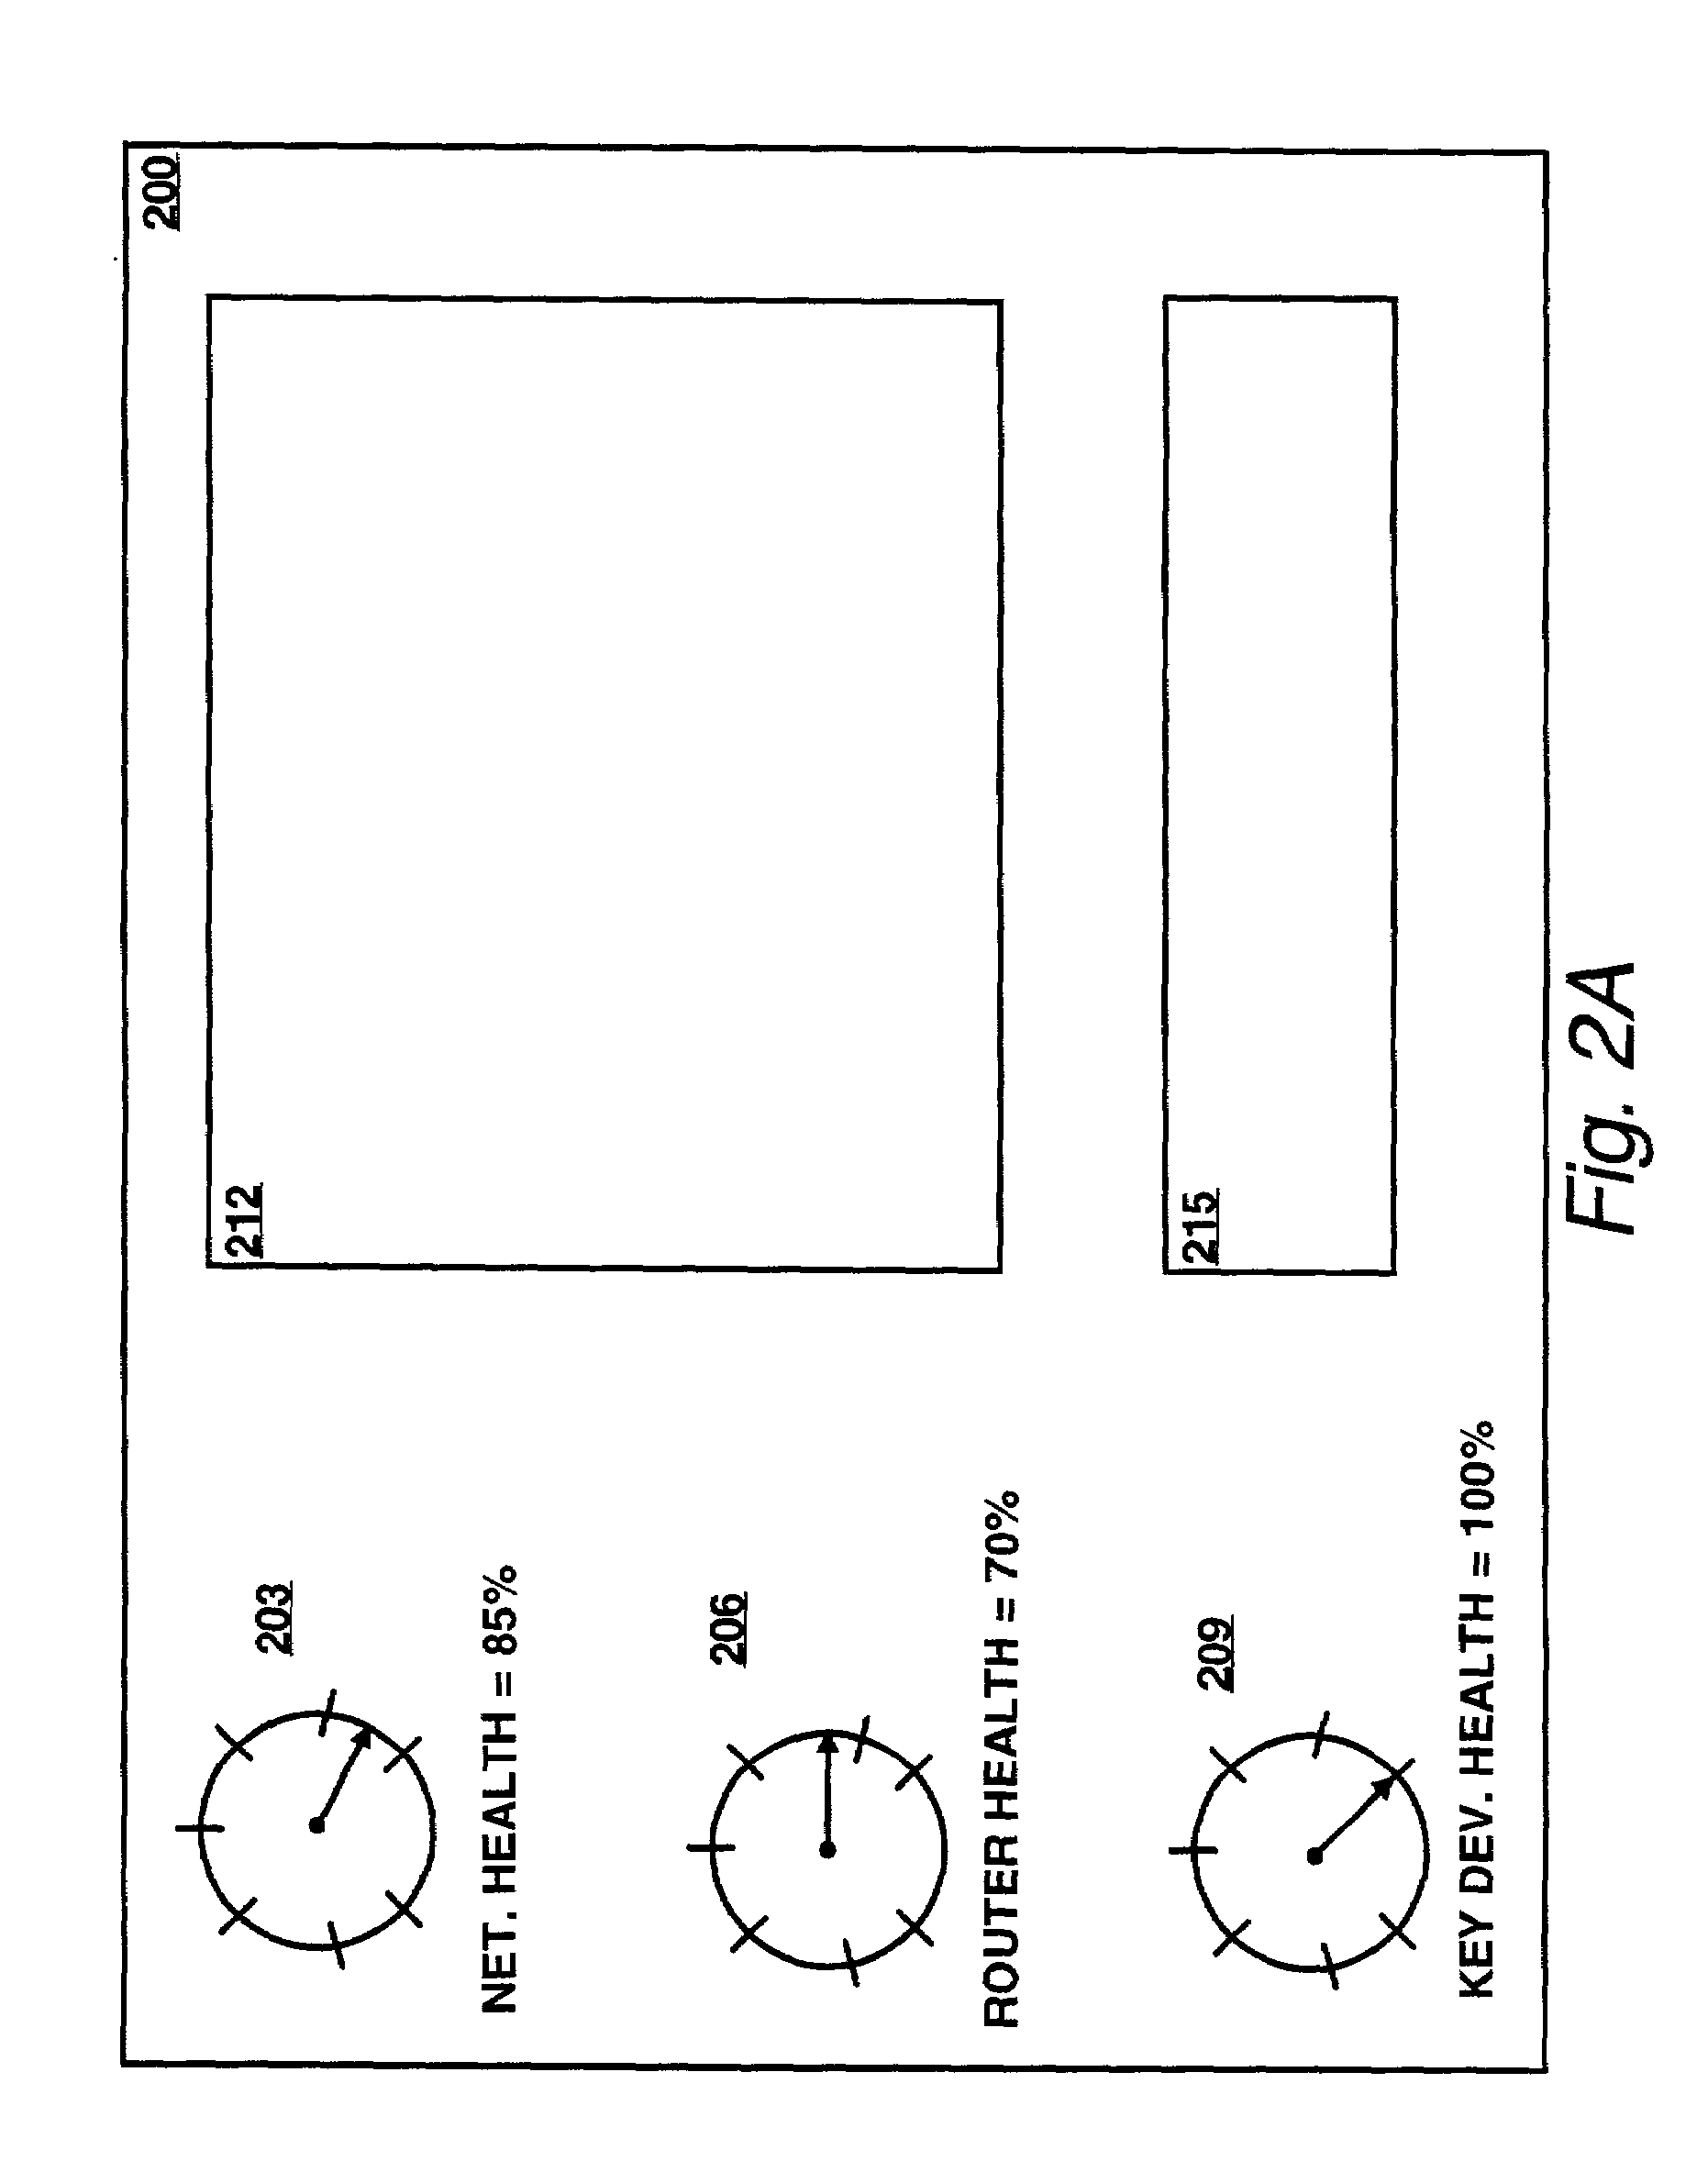 Method and apparatus for customizably calculating and displaying health of a computer network